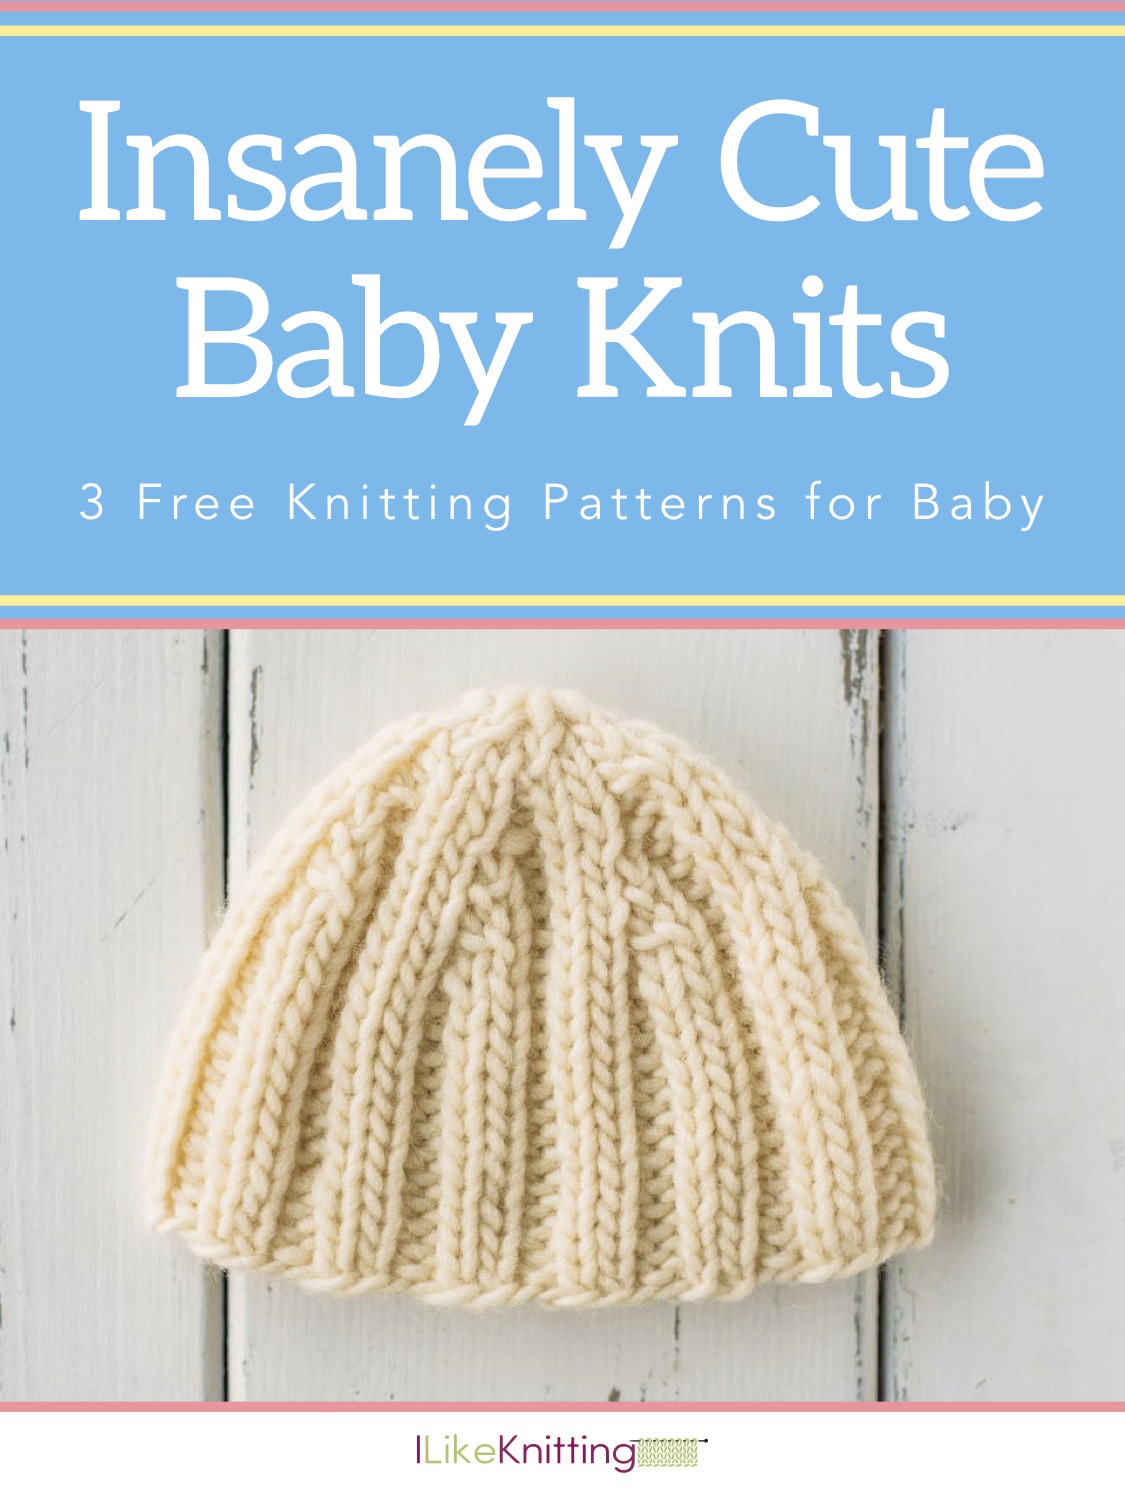 Insanely Cute Baby Knits 3 Free Knitting Patterns For Baby